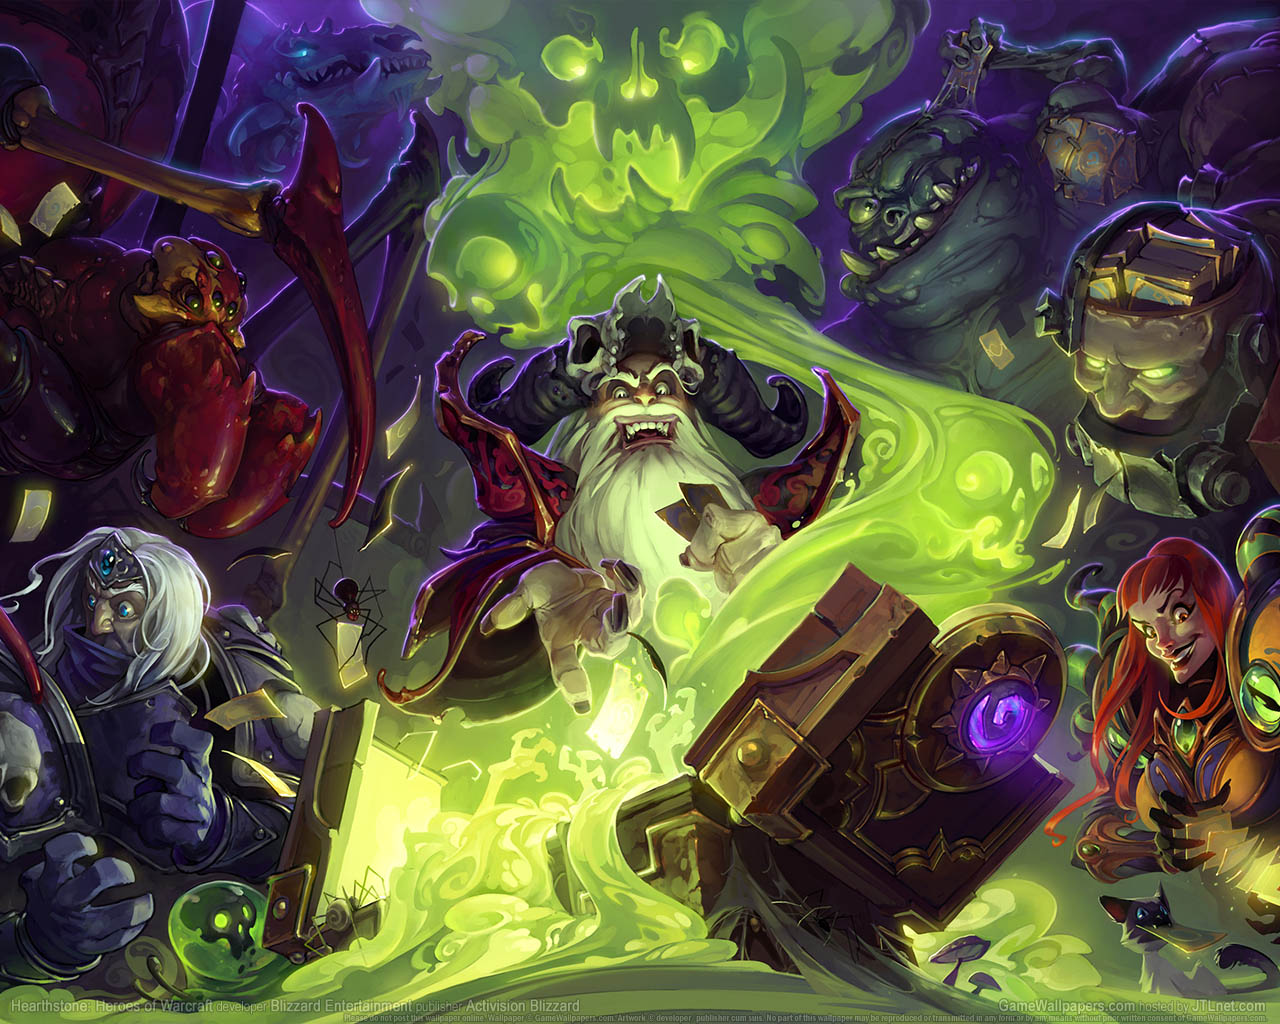 Hearthstone%253A Heroes of Warcraft achtergrond 08 1280x1024